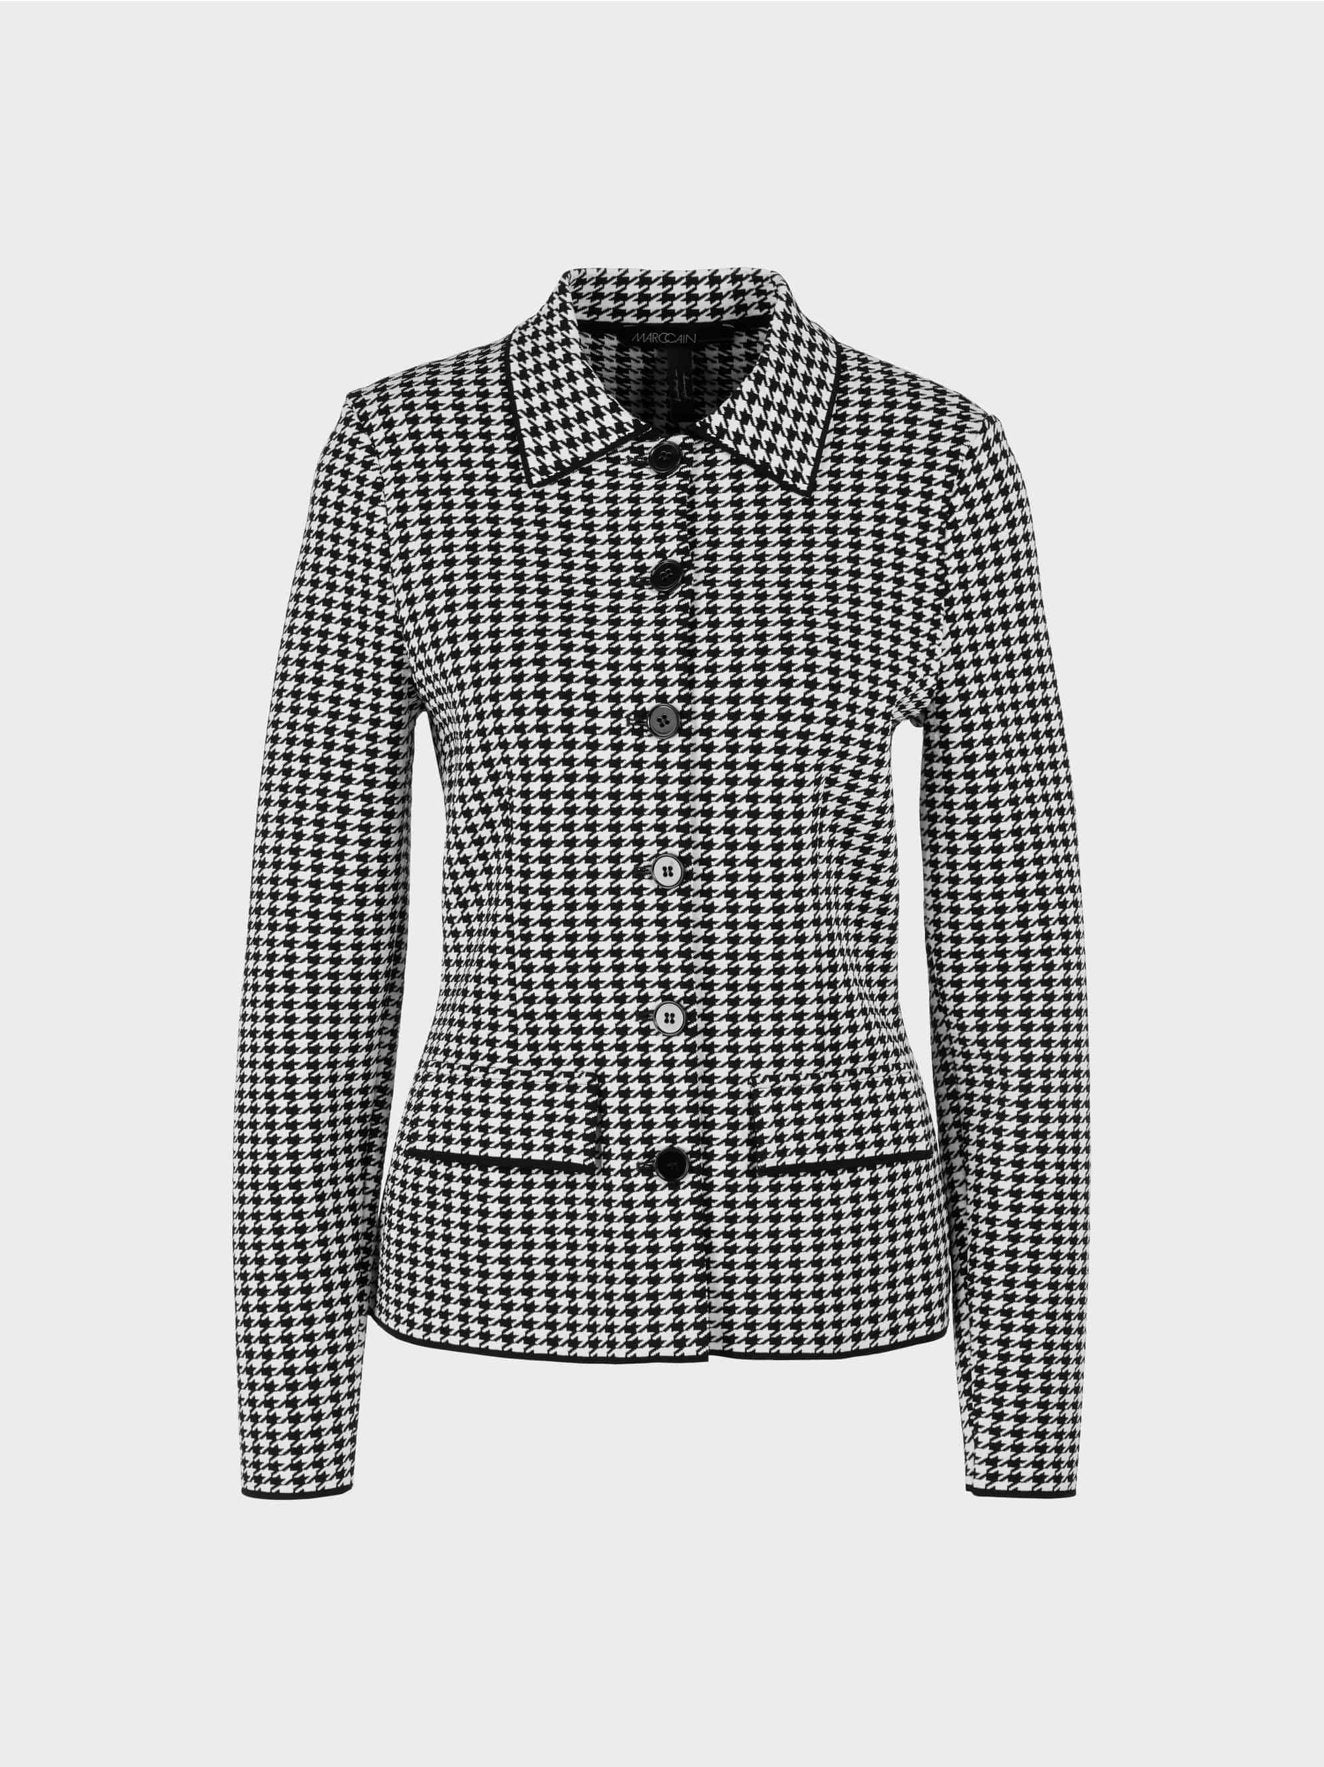 Checked Jacket Knitted In Germany_VC 31.10 M66_190_07